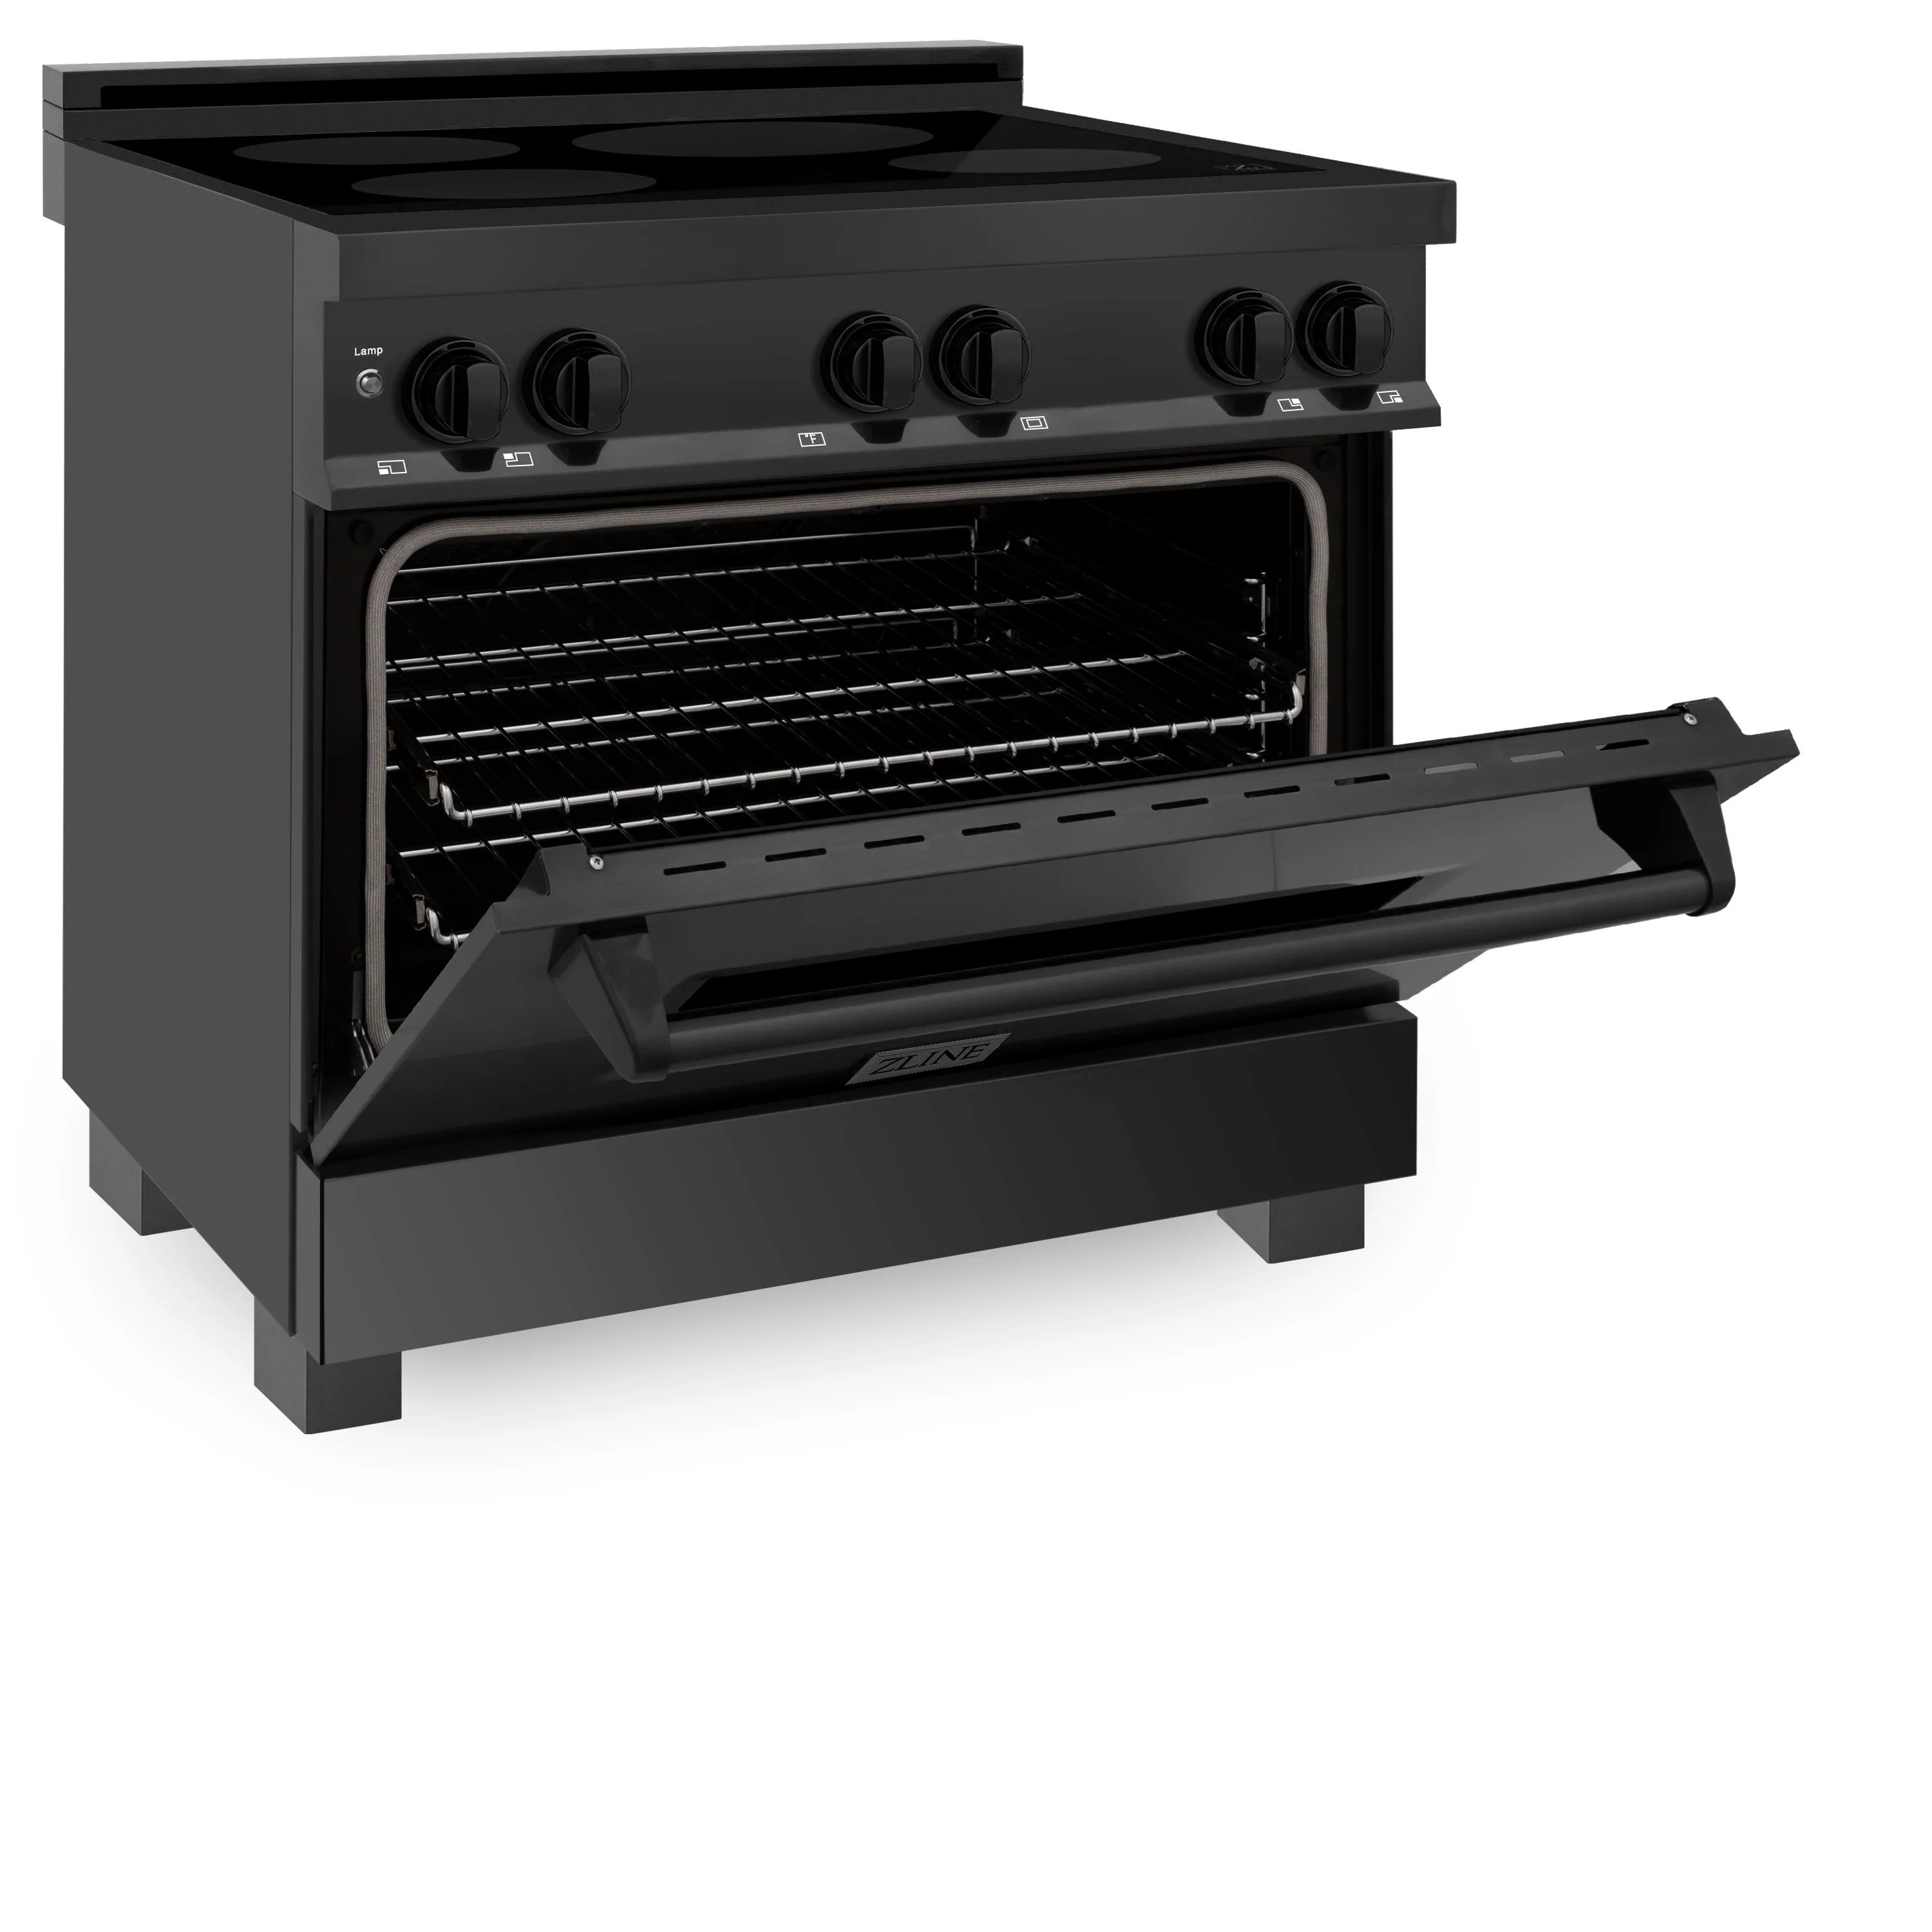 ZLINE Induction Range with a 4 Element Stove and Electric Oven in Black Stainless Steel (RAIND-BS)